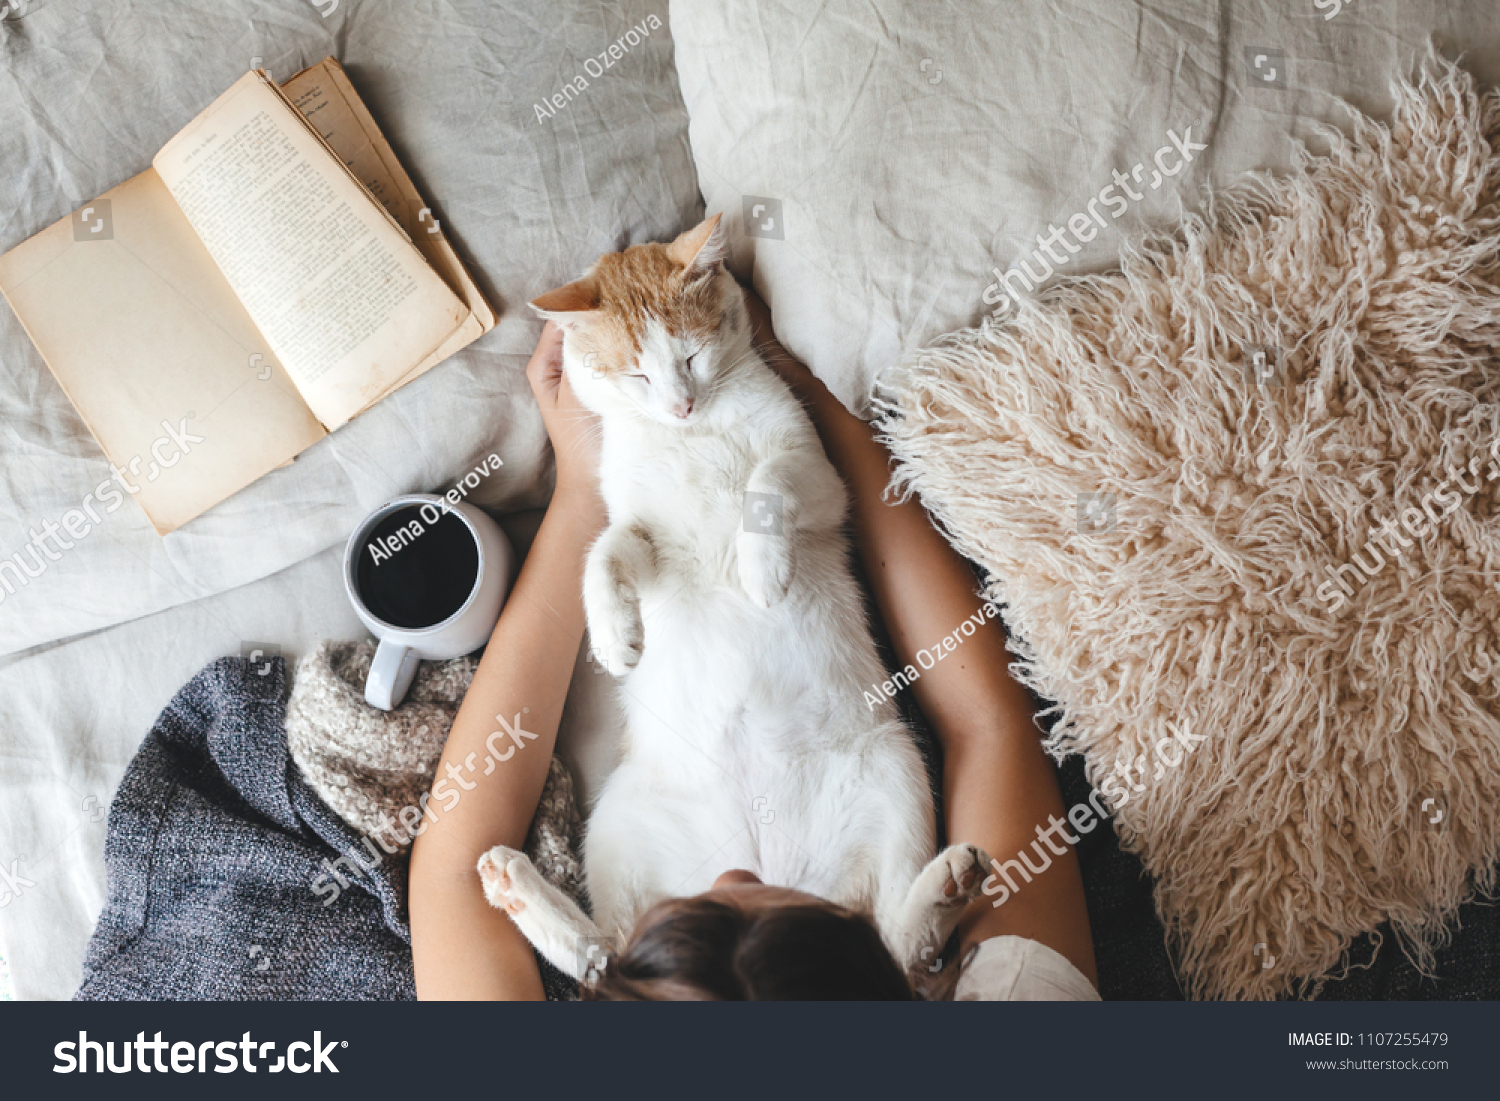 Cute ginger cat is sleeping in the bed on warm blanket. Cold autumn or winter weekend while reading a book and drinking warm coffee or tea. Hygge concept. Text on the pages is not recognizable. #1107255479